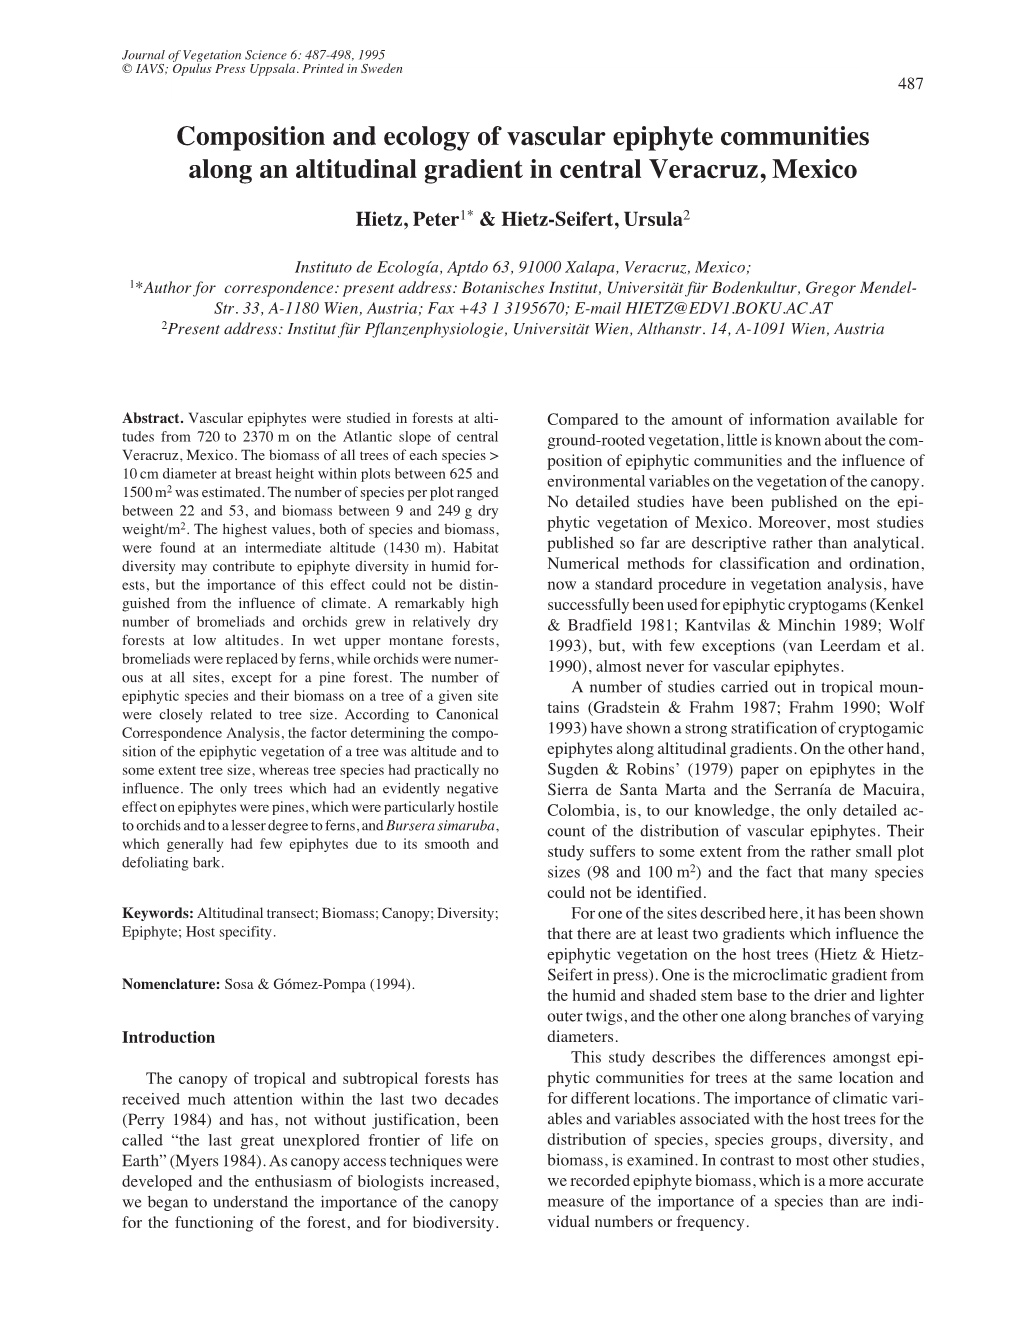 Composition and Ecology of Vascular Epiphyte Communities Along an Altitudinal Gradient in Central Veracruz, Mexico